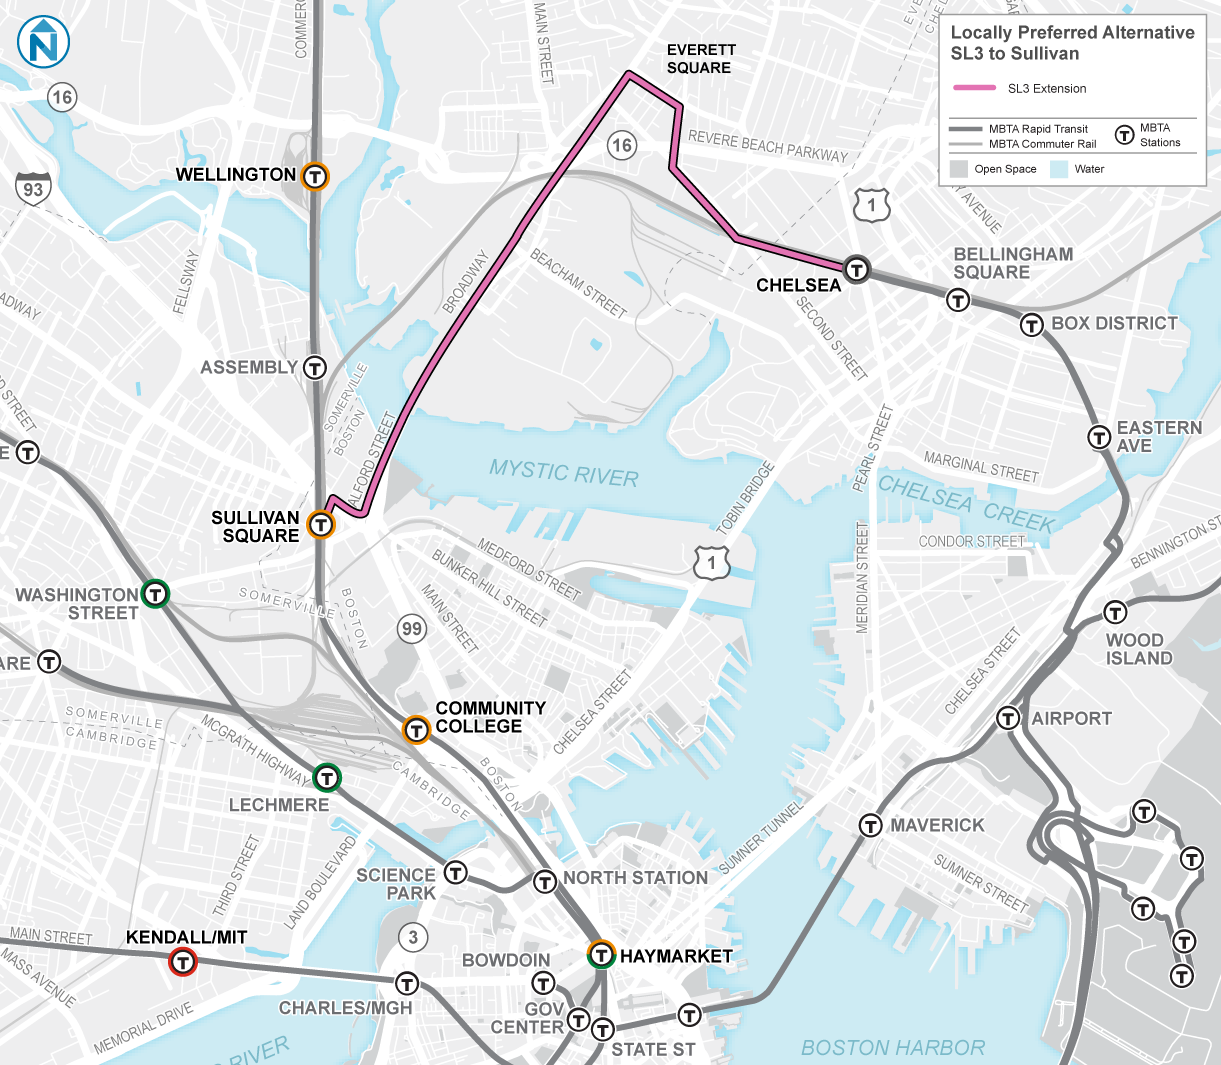 Map showing proposed SL3 extension from Chelsea, through Everett, and ending in Sullivan Square, Boston's Charlestown neighborhood